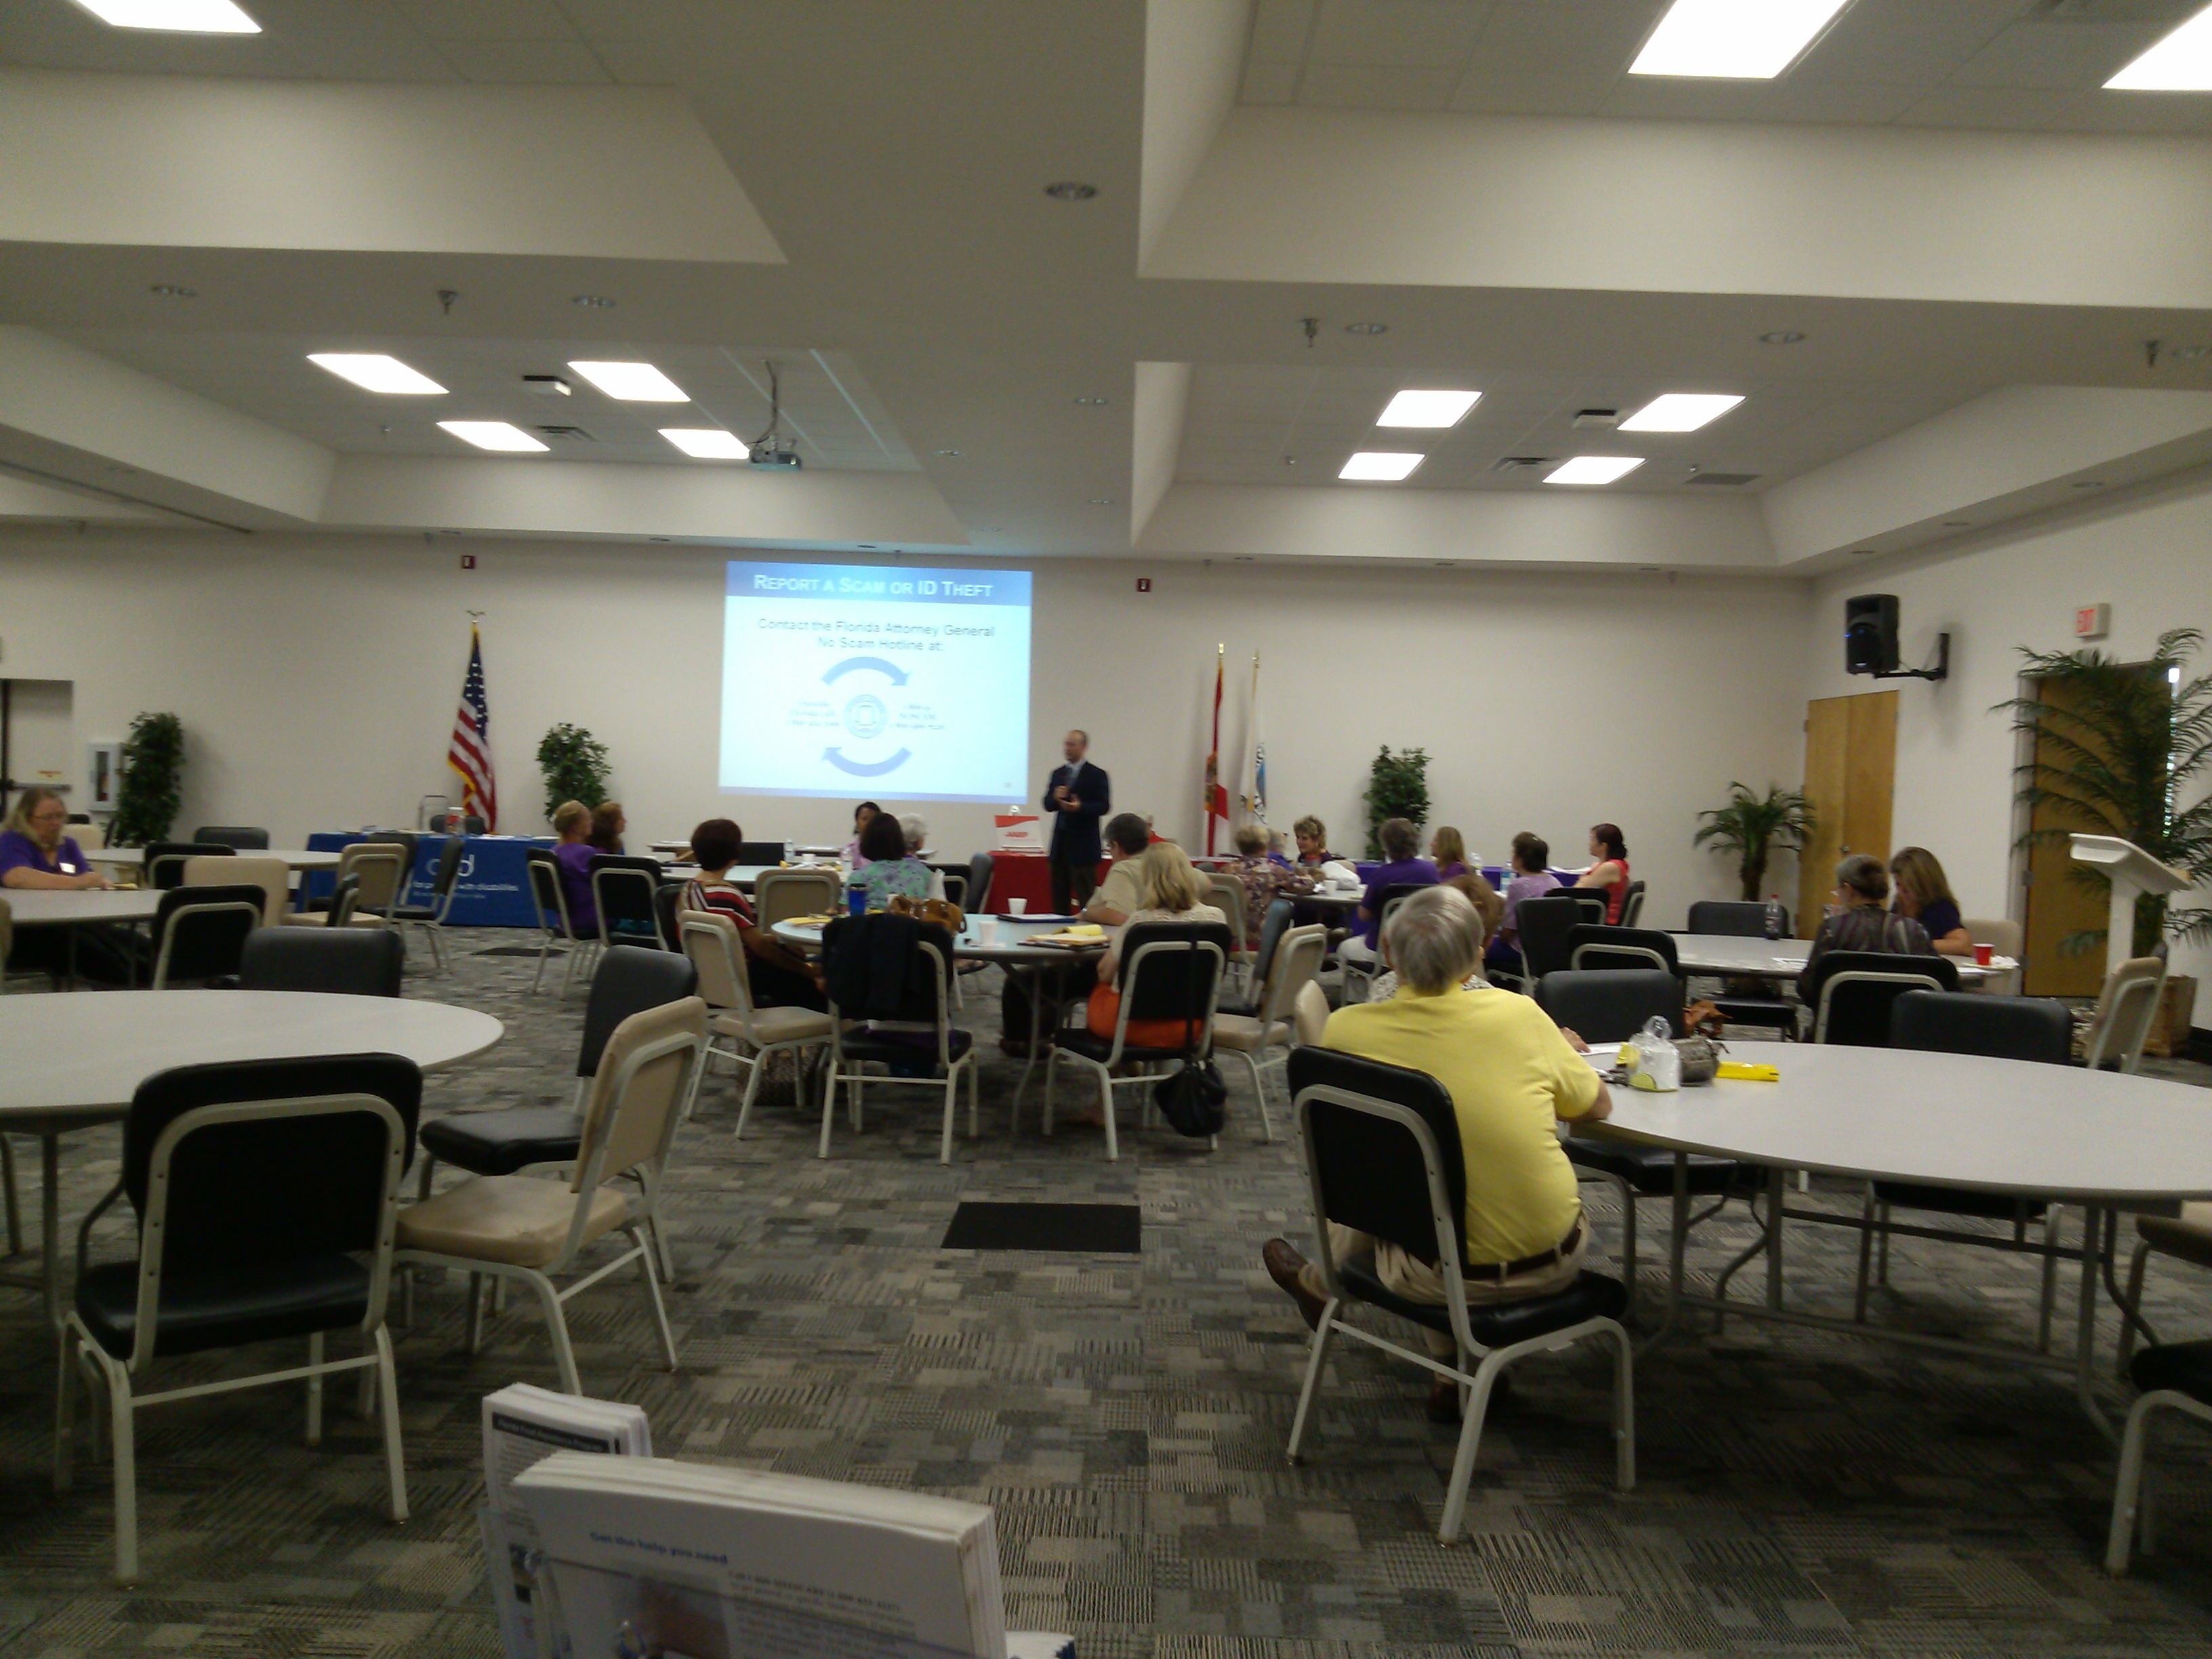 The June 9 event, held in Niceville, featured Michael Dasinger with the Victims Services Unit of the Office of the Attorney General.  